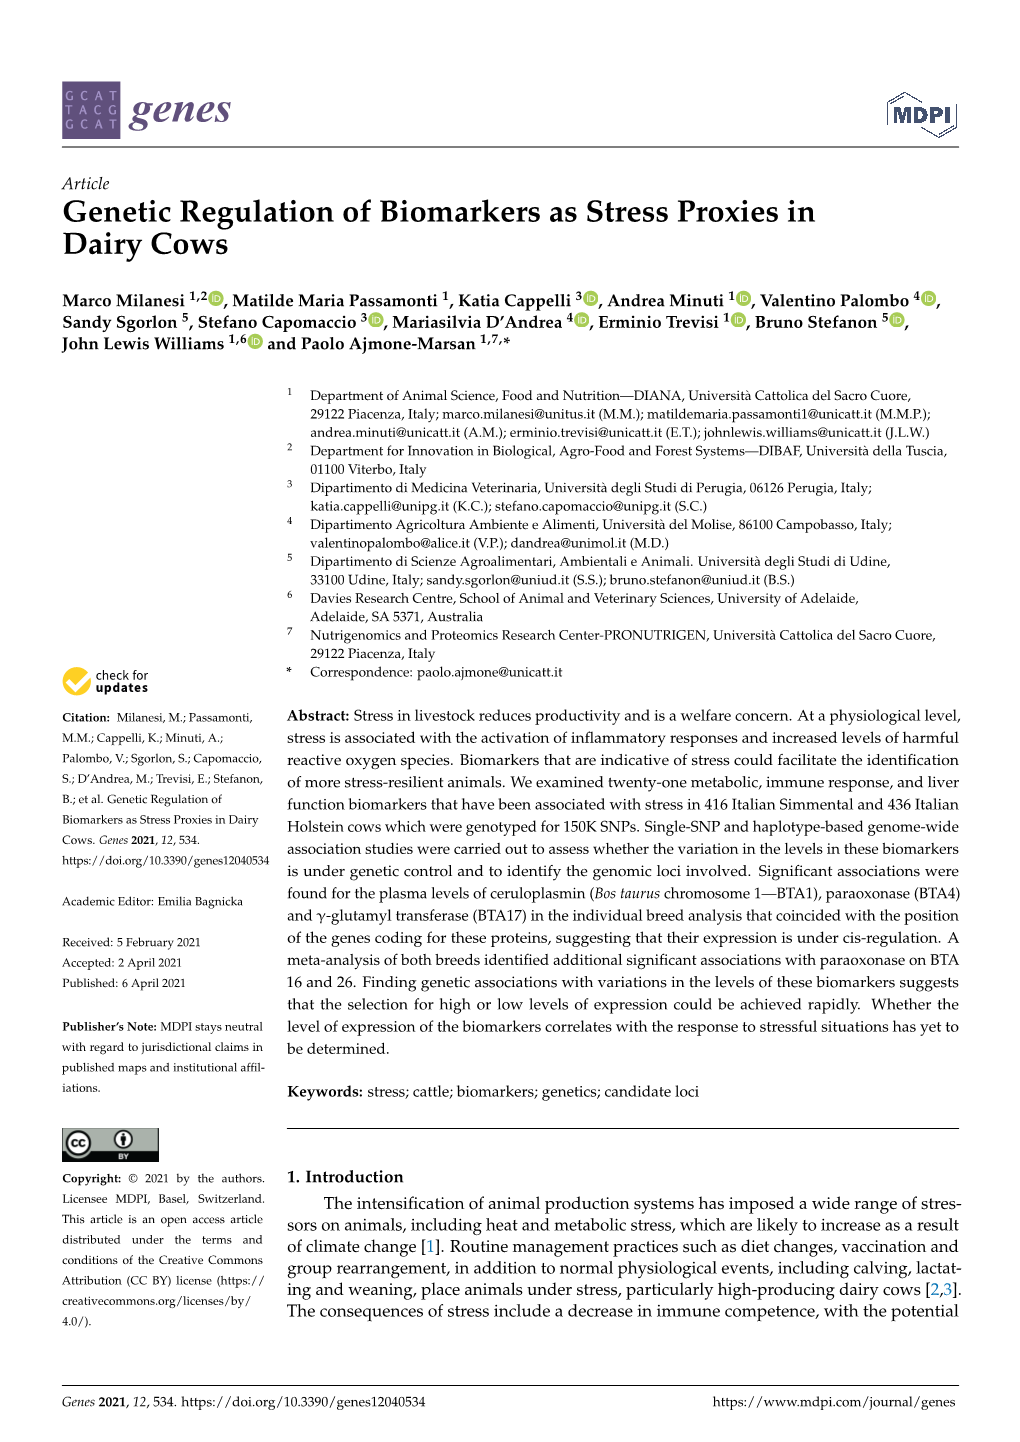 Genetic Regulation of Biomarkers As Stress Proxies Indairy Cows